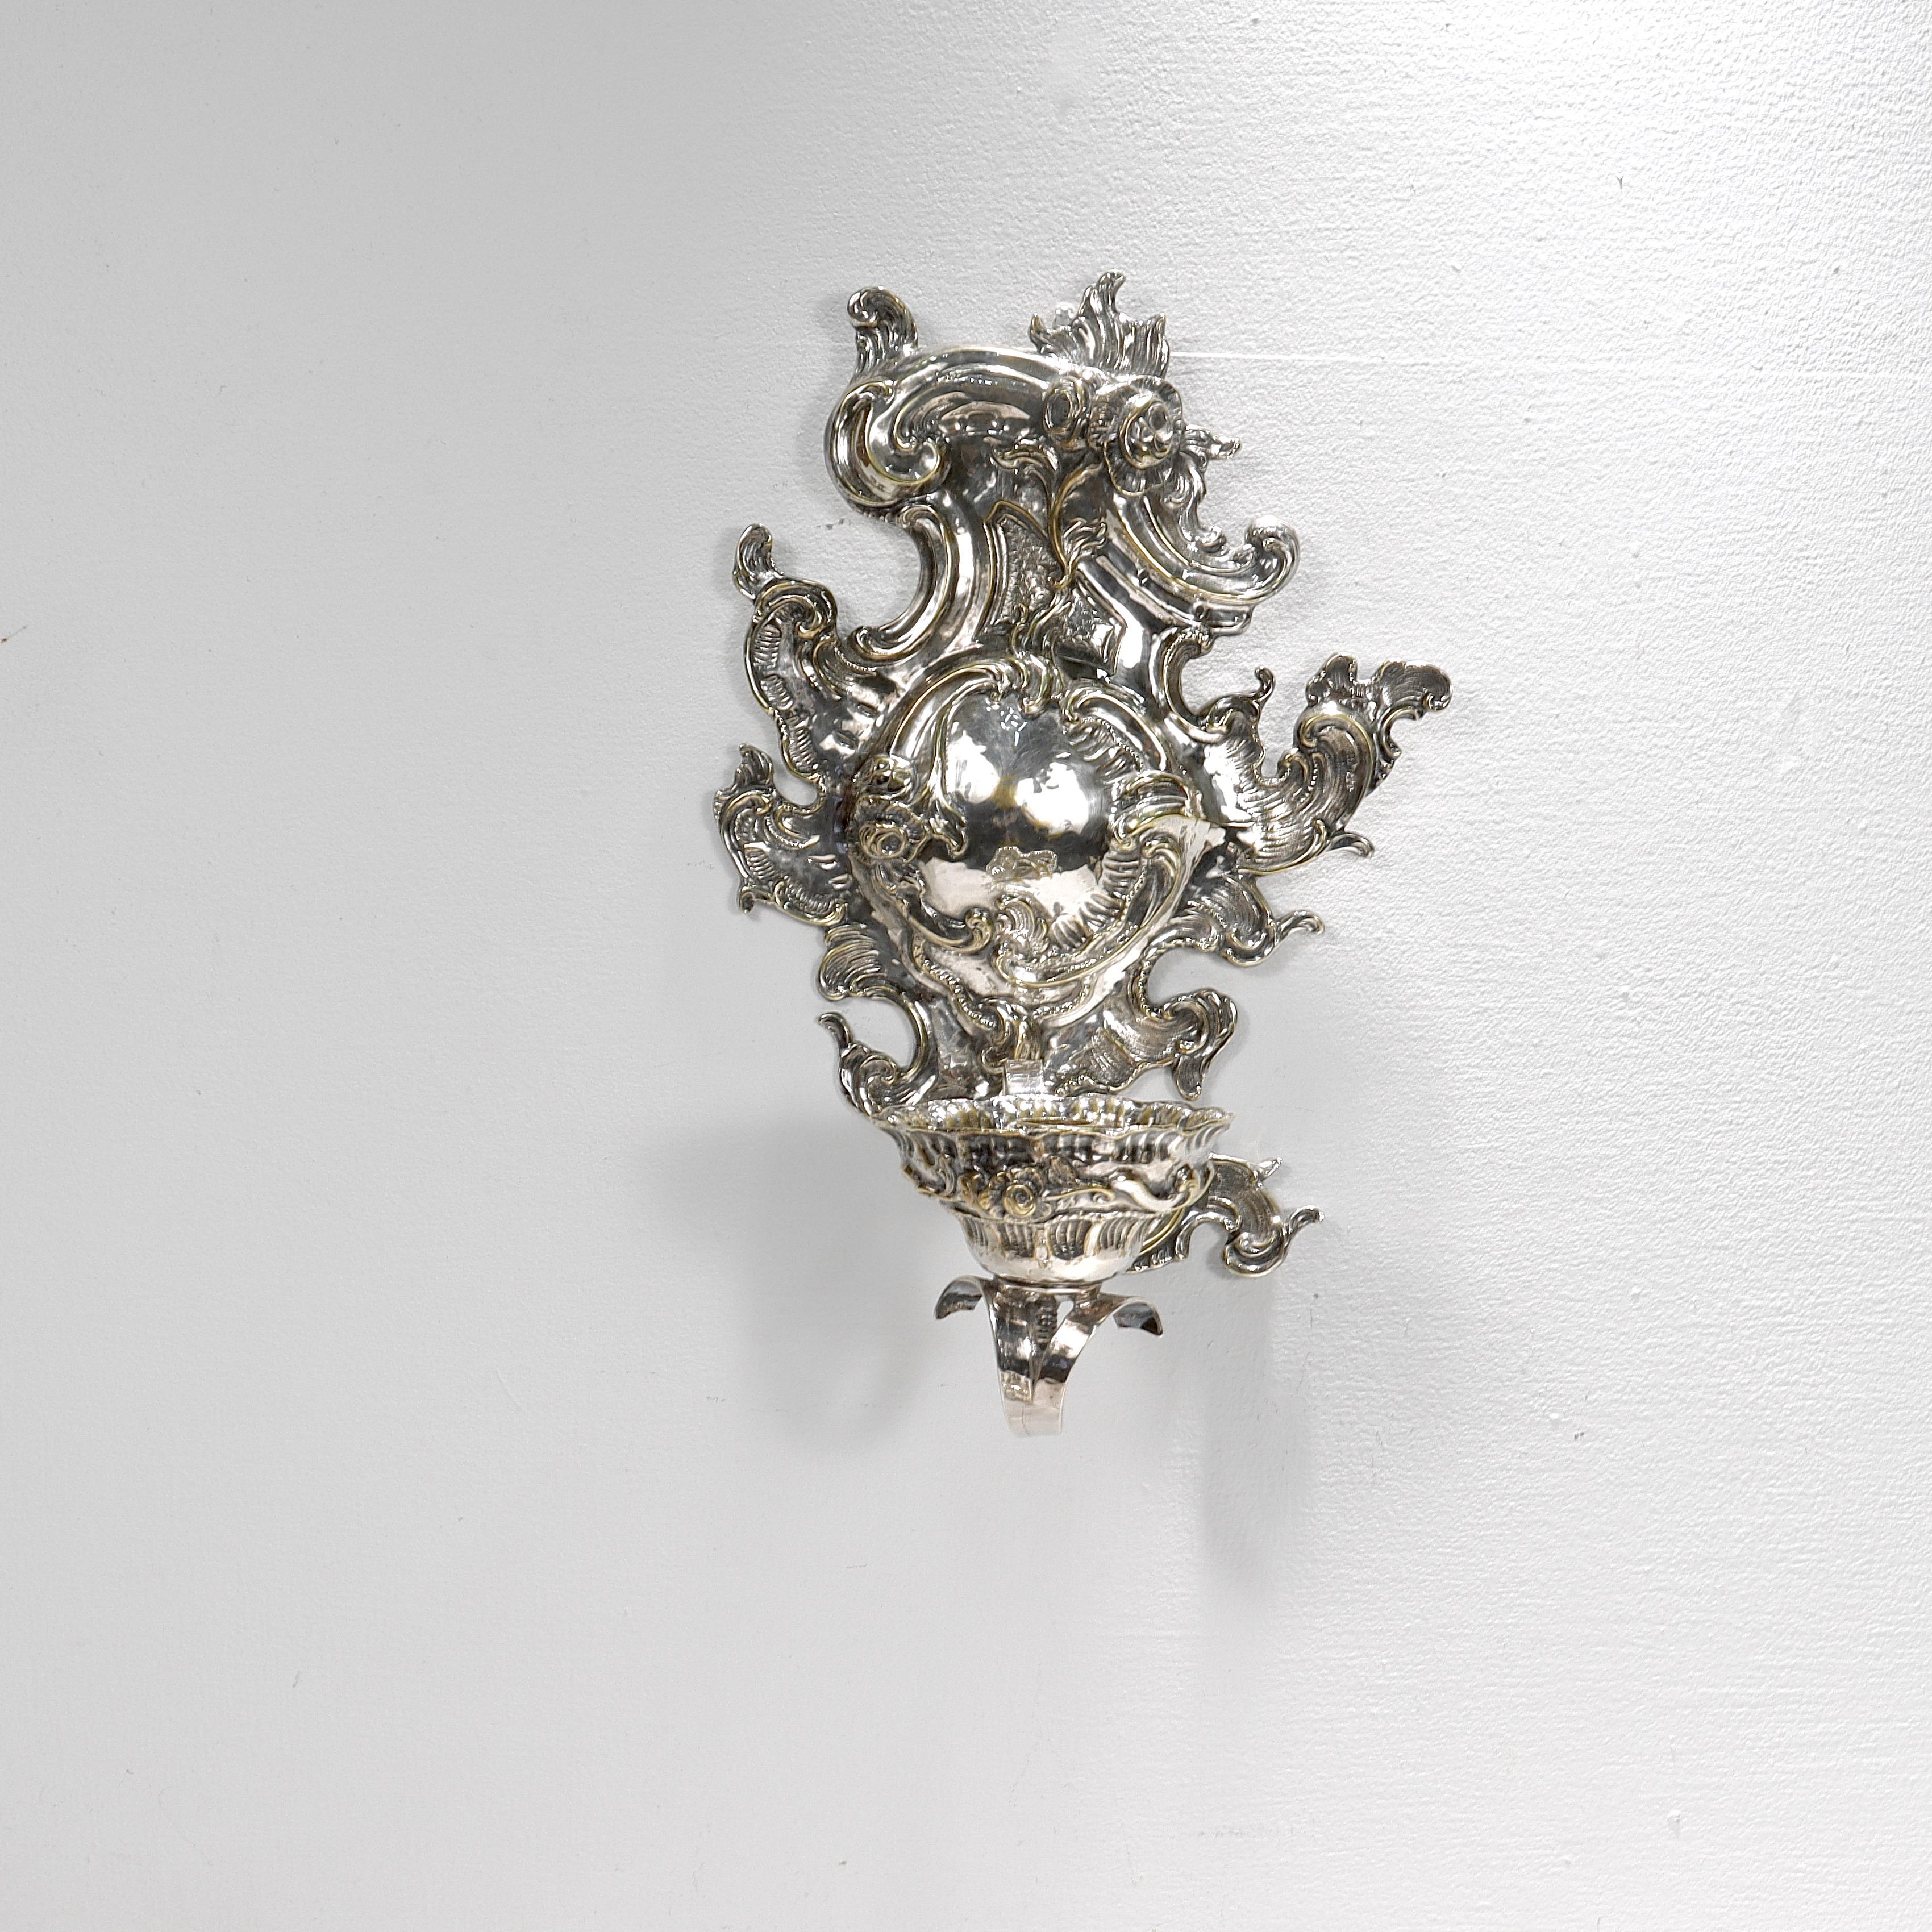 Antique Rococo or Rococo Revival Silver Plated Wall Sconces In Good Condition For Sale In Philadelphia, PA